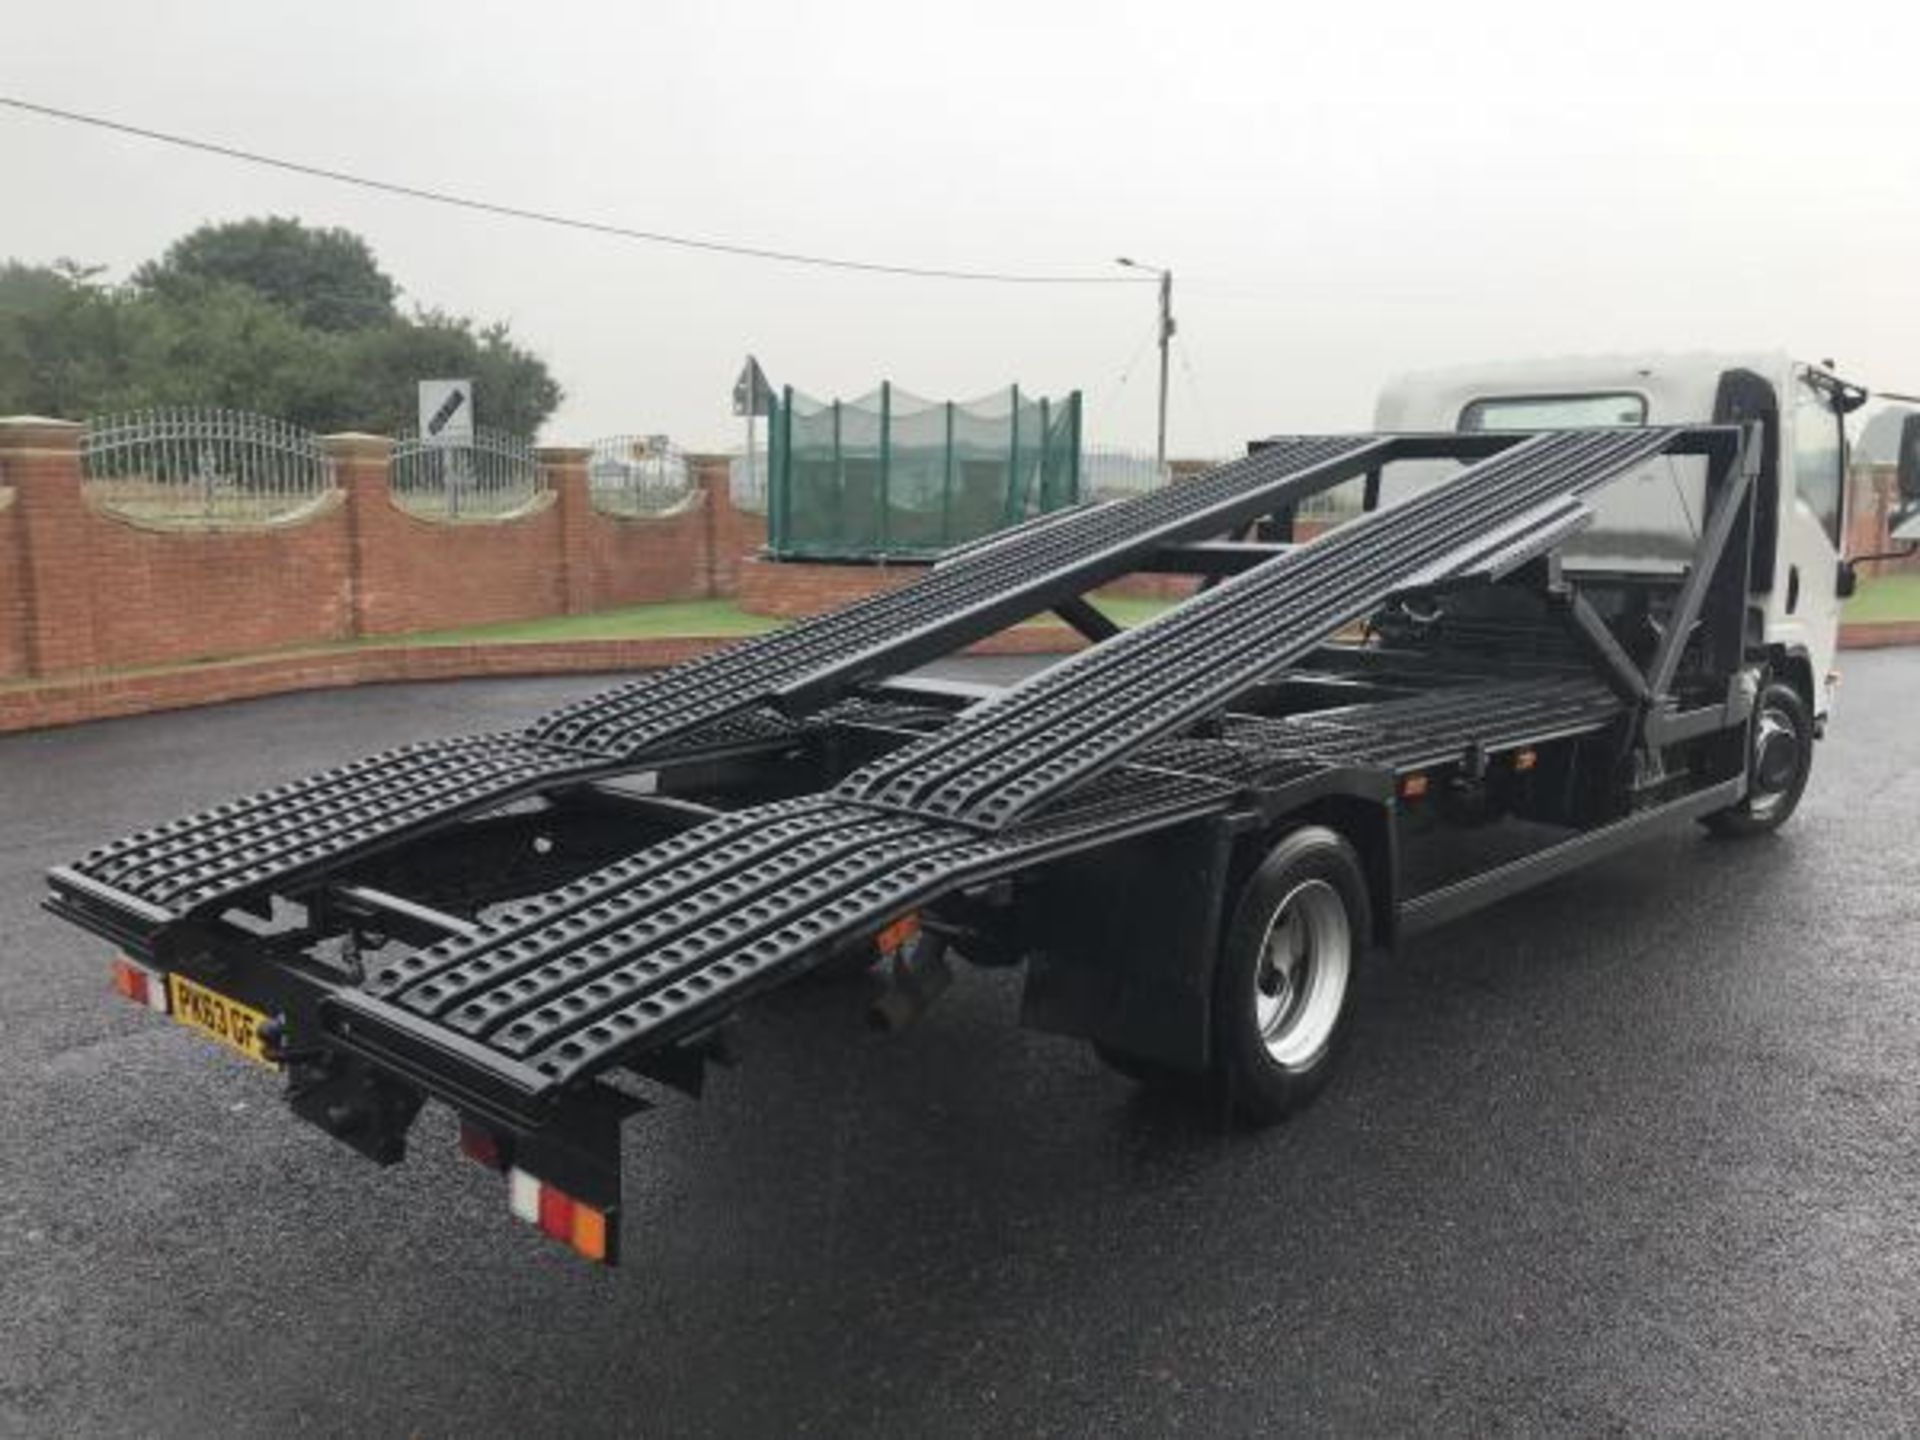 2013 ON 63 PLATE ISUZU N 75.190 7.5 TON CAR TRANSPORTER WITH LIFT UP DECK *PLUS VAT* - Image 13 of 20